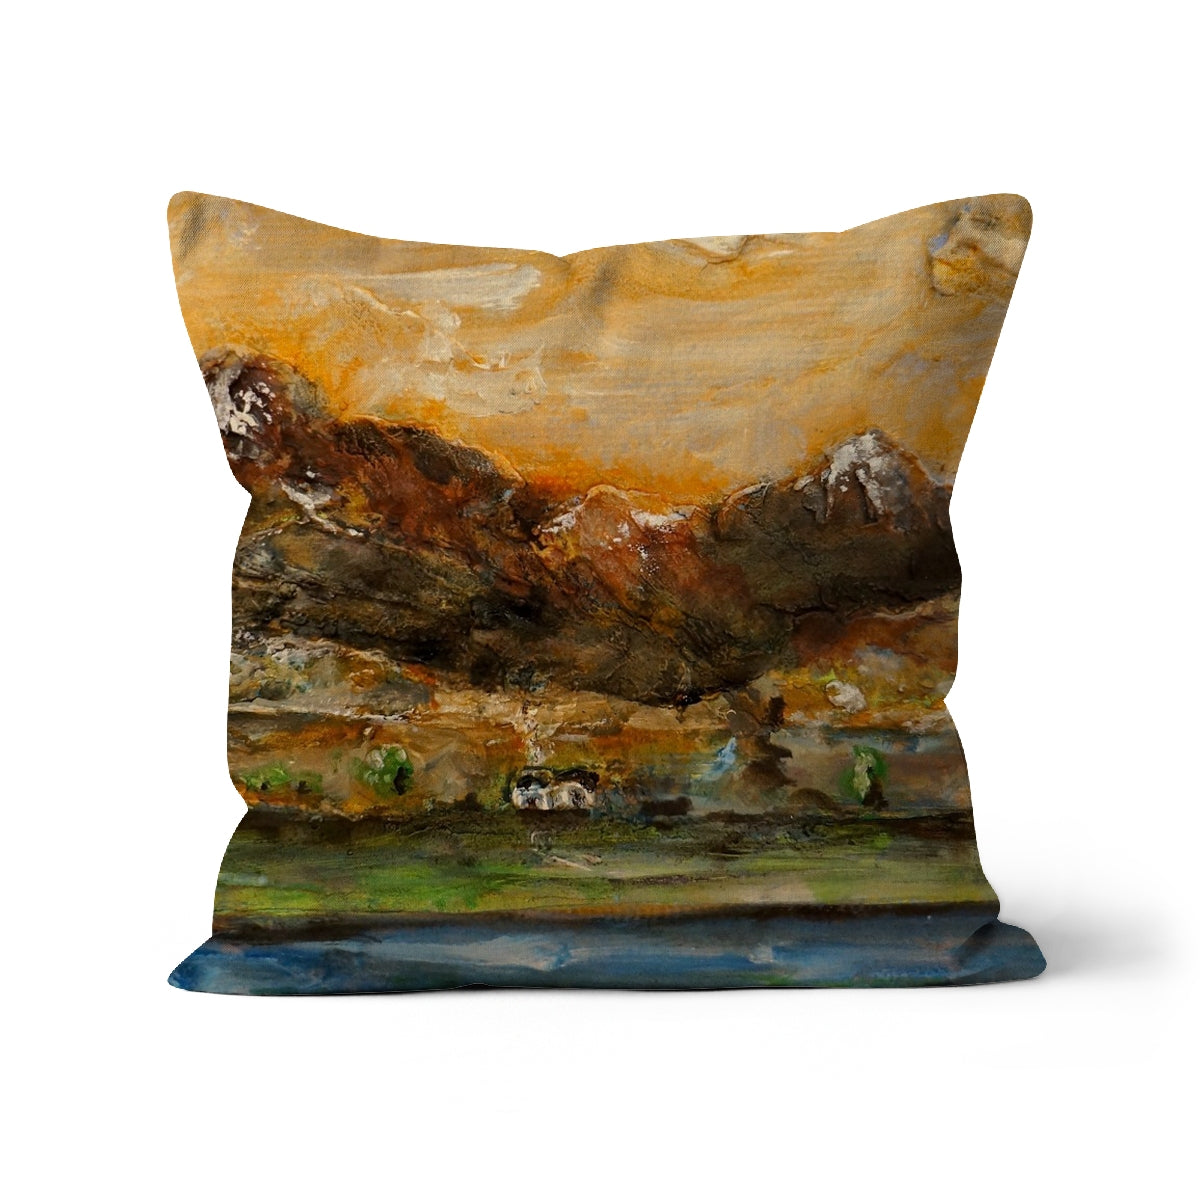 A Glencoe Cottage Art Gifts Cushion-Cushions-Glencoe Art Gallery-Canvas-24"x24"-Paintings, Prints, Homeware, Art Gifts From Scotland By Scottish Artist Kevin Hunter